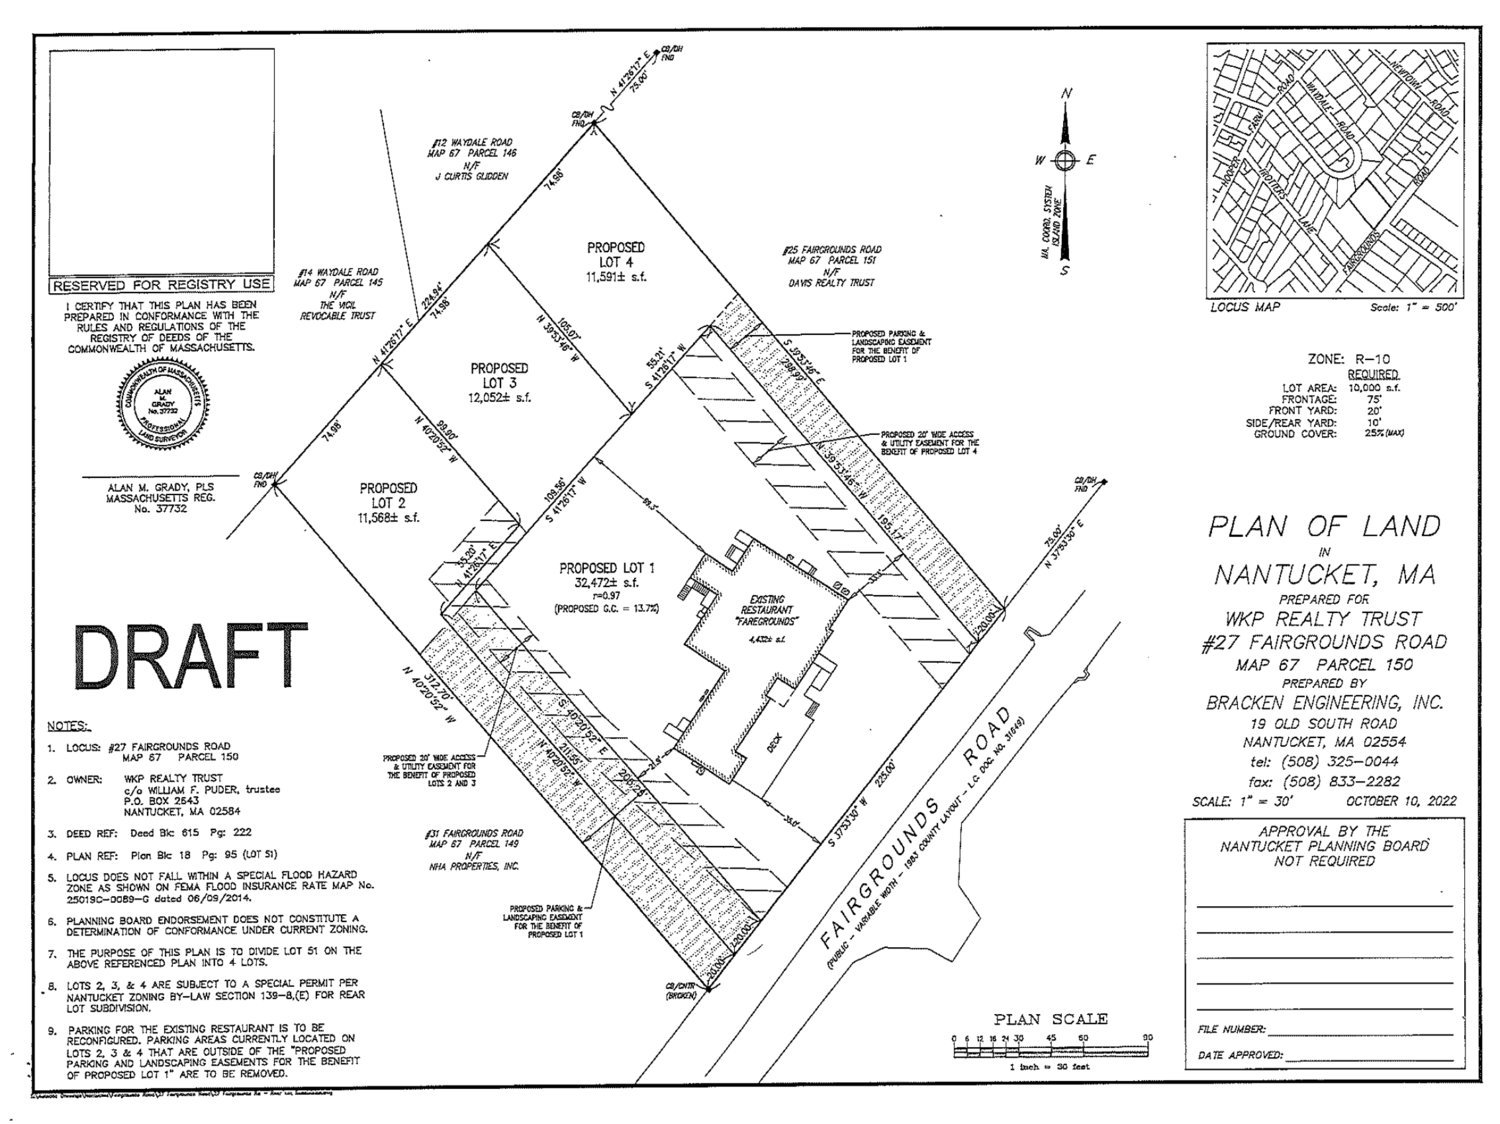 The approved plan creates three house lots at the rear of the 27 Fairgrounds Road property with the restaurant in the front.